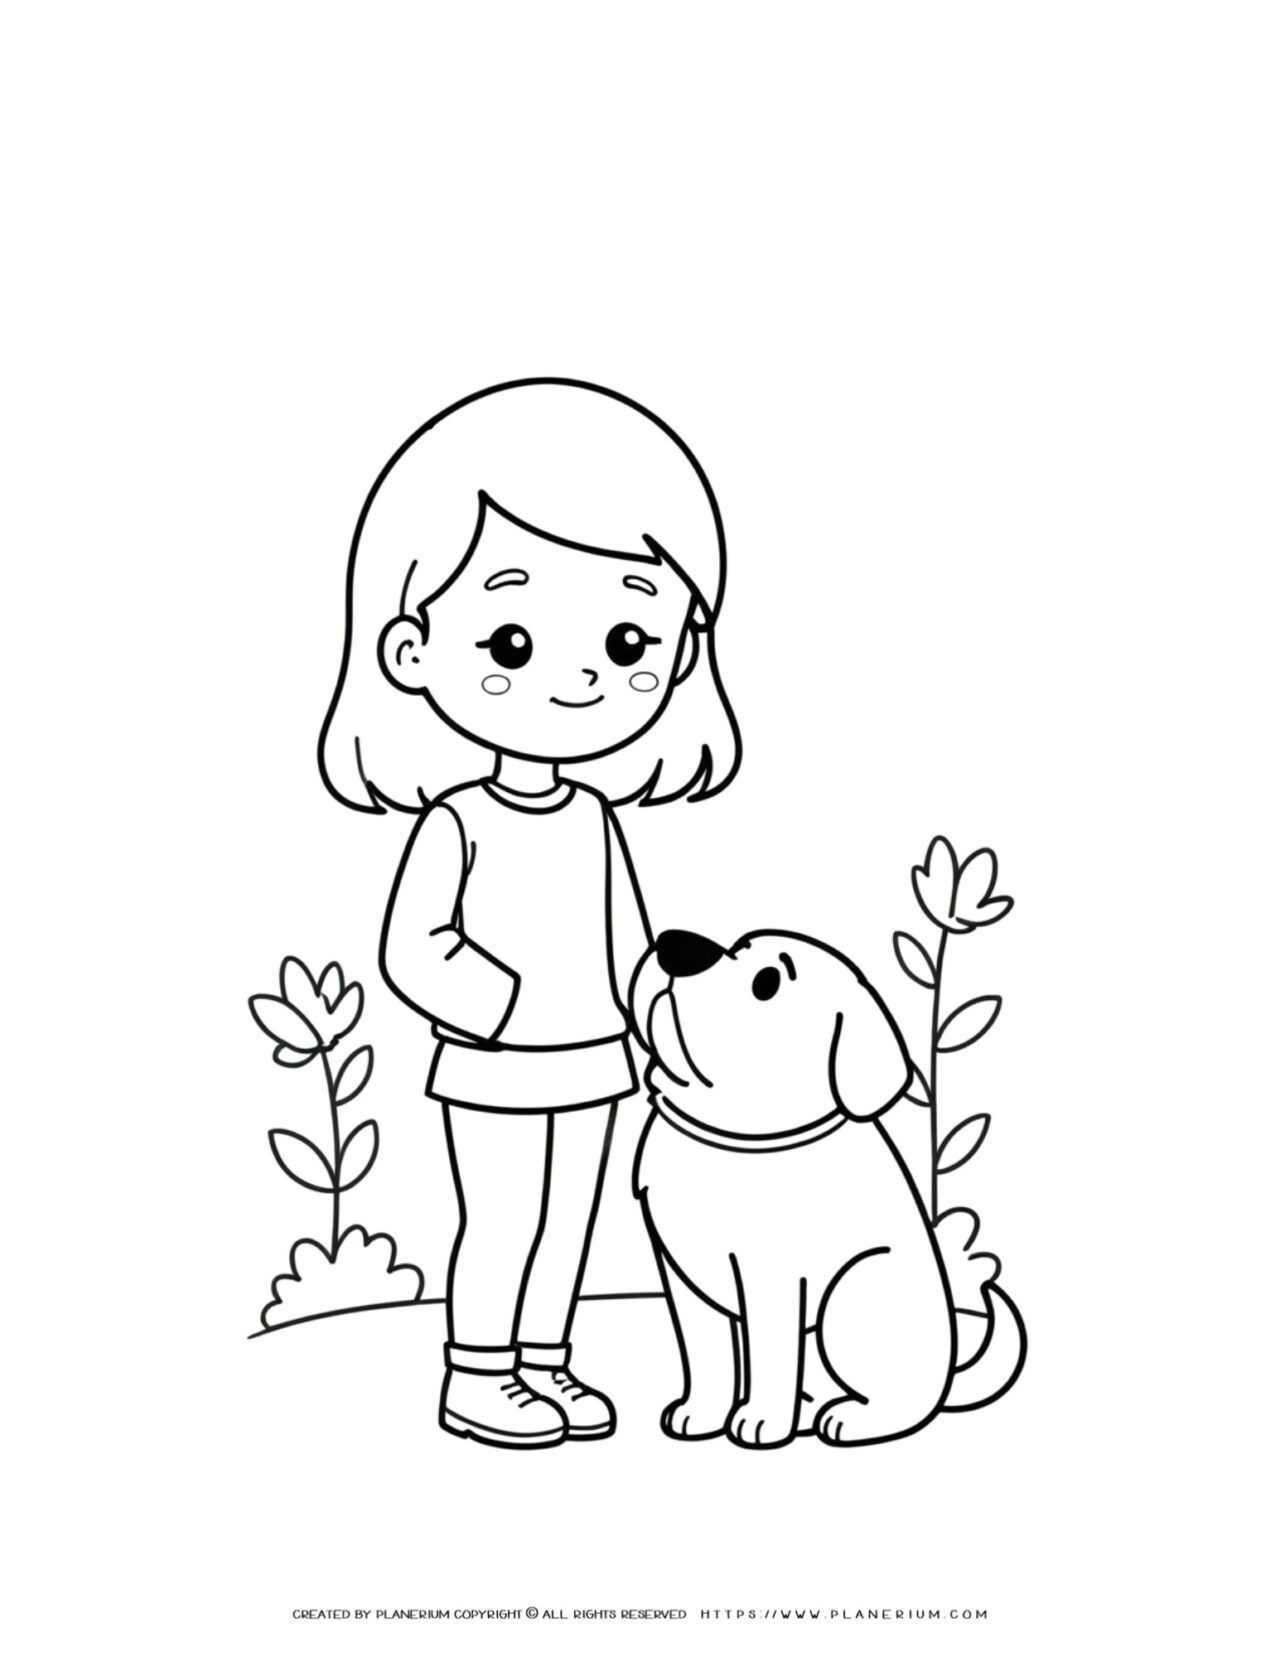 girl-and-dog-adventure-in-nature-coloring-page-for-kids